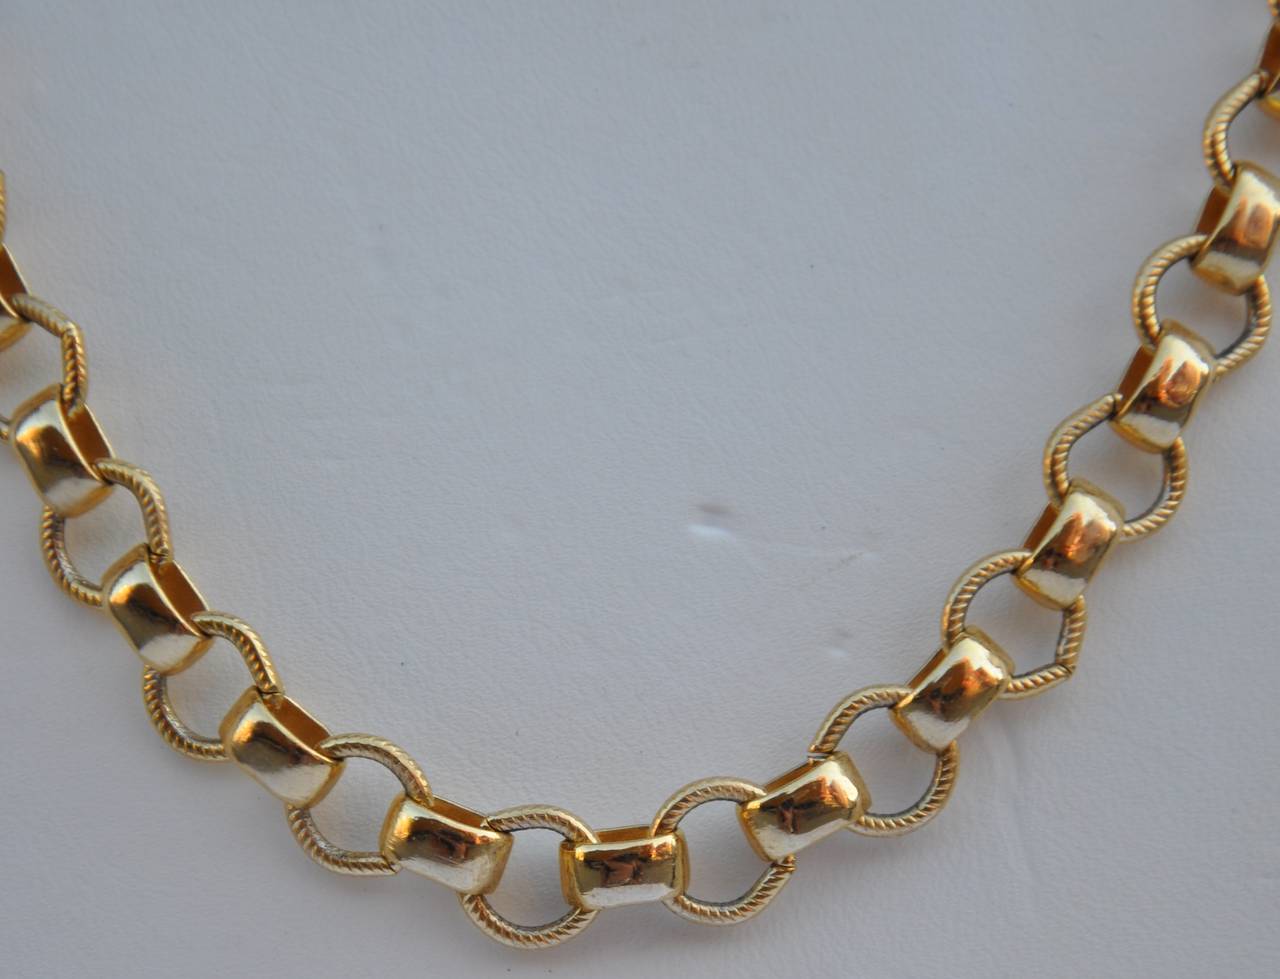 Gilded gold vermeil finish European-style chain-link necklace measures 18" in length, 5/16" in width, and 2/8" in depth.